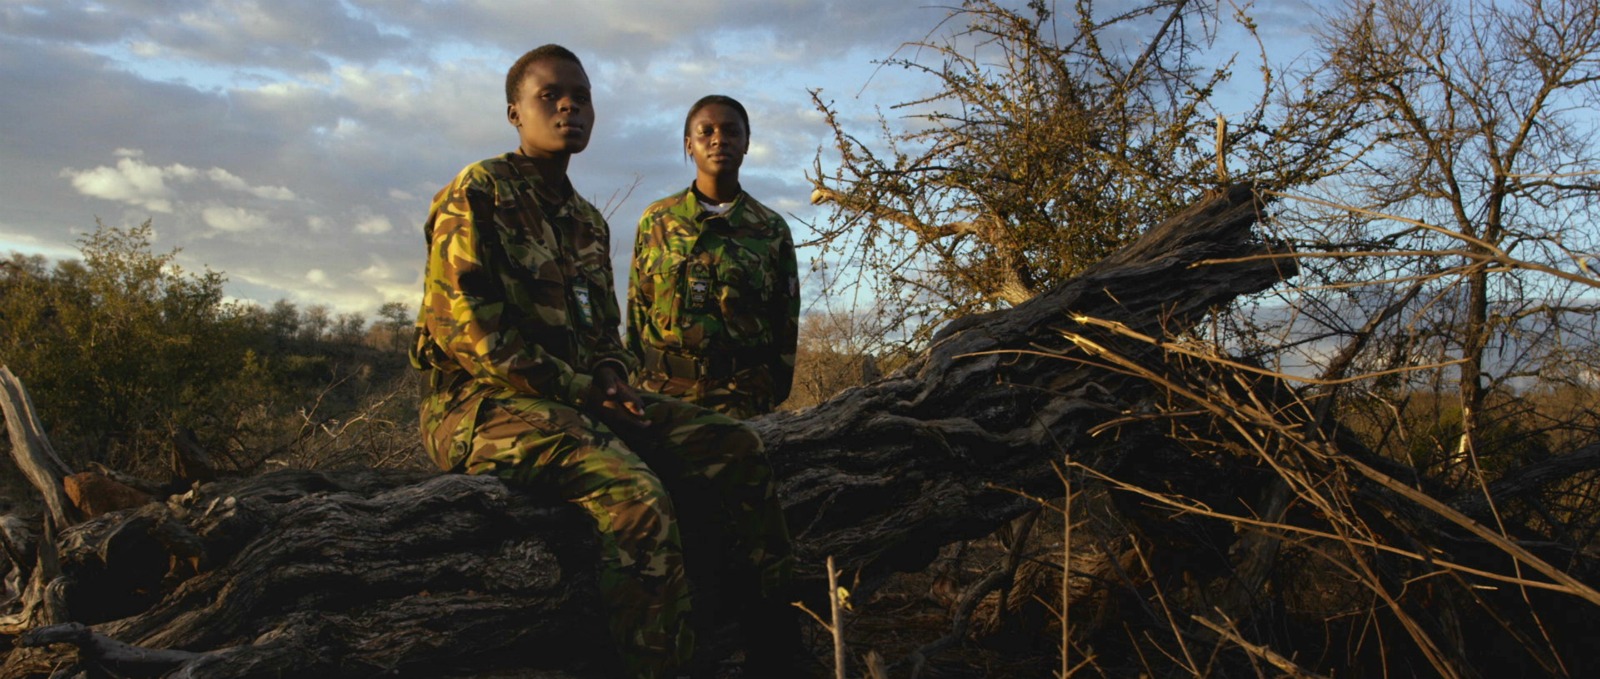 VIDEO-These Badass Women are Protecting Some of the Last Remaining Rhinos in the Wild